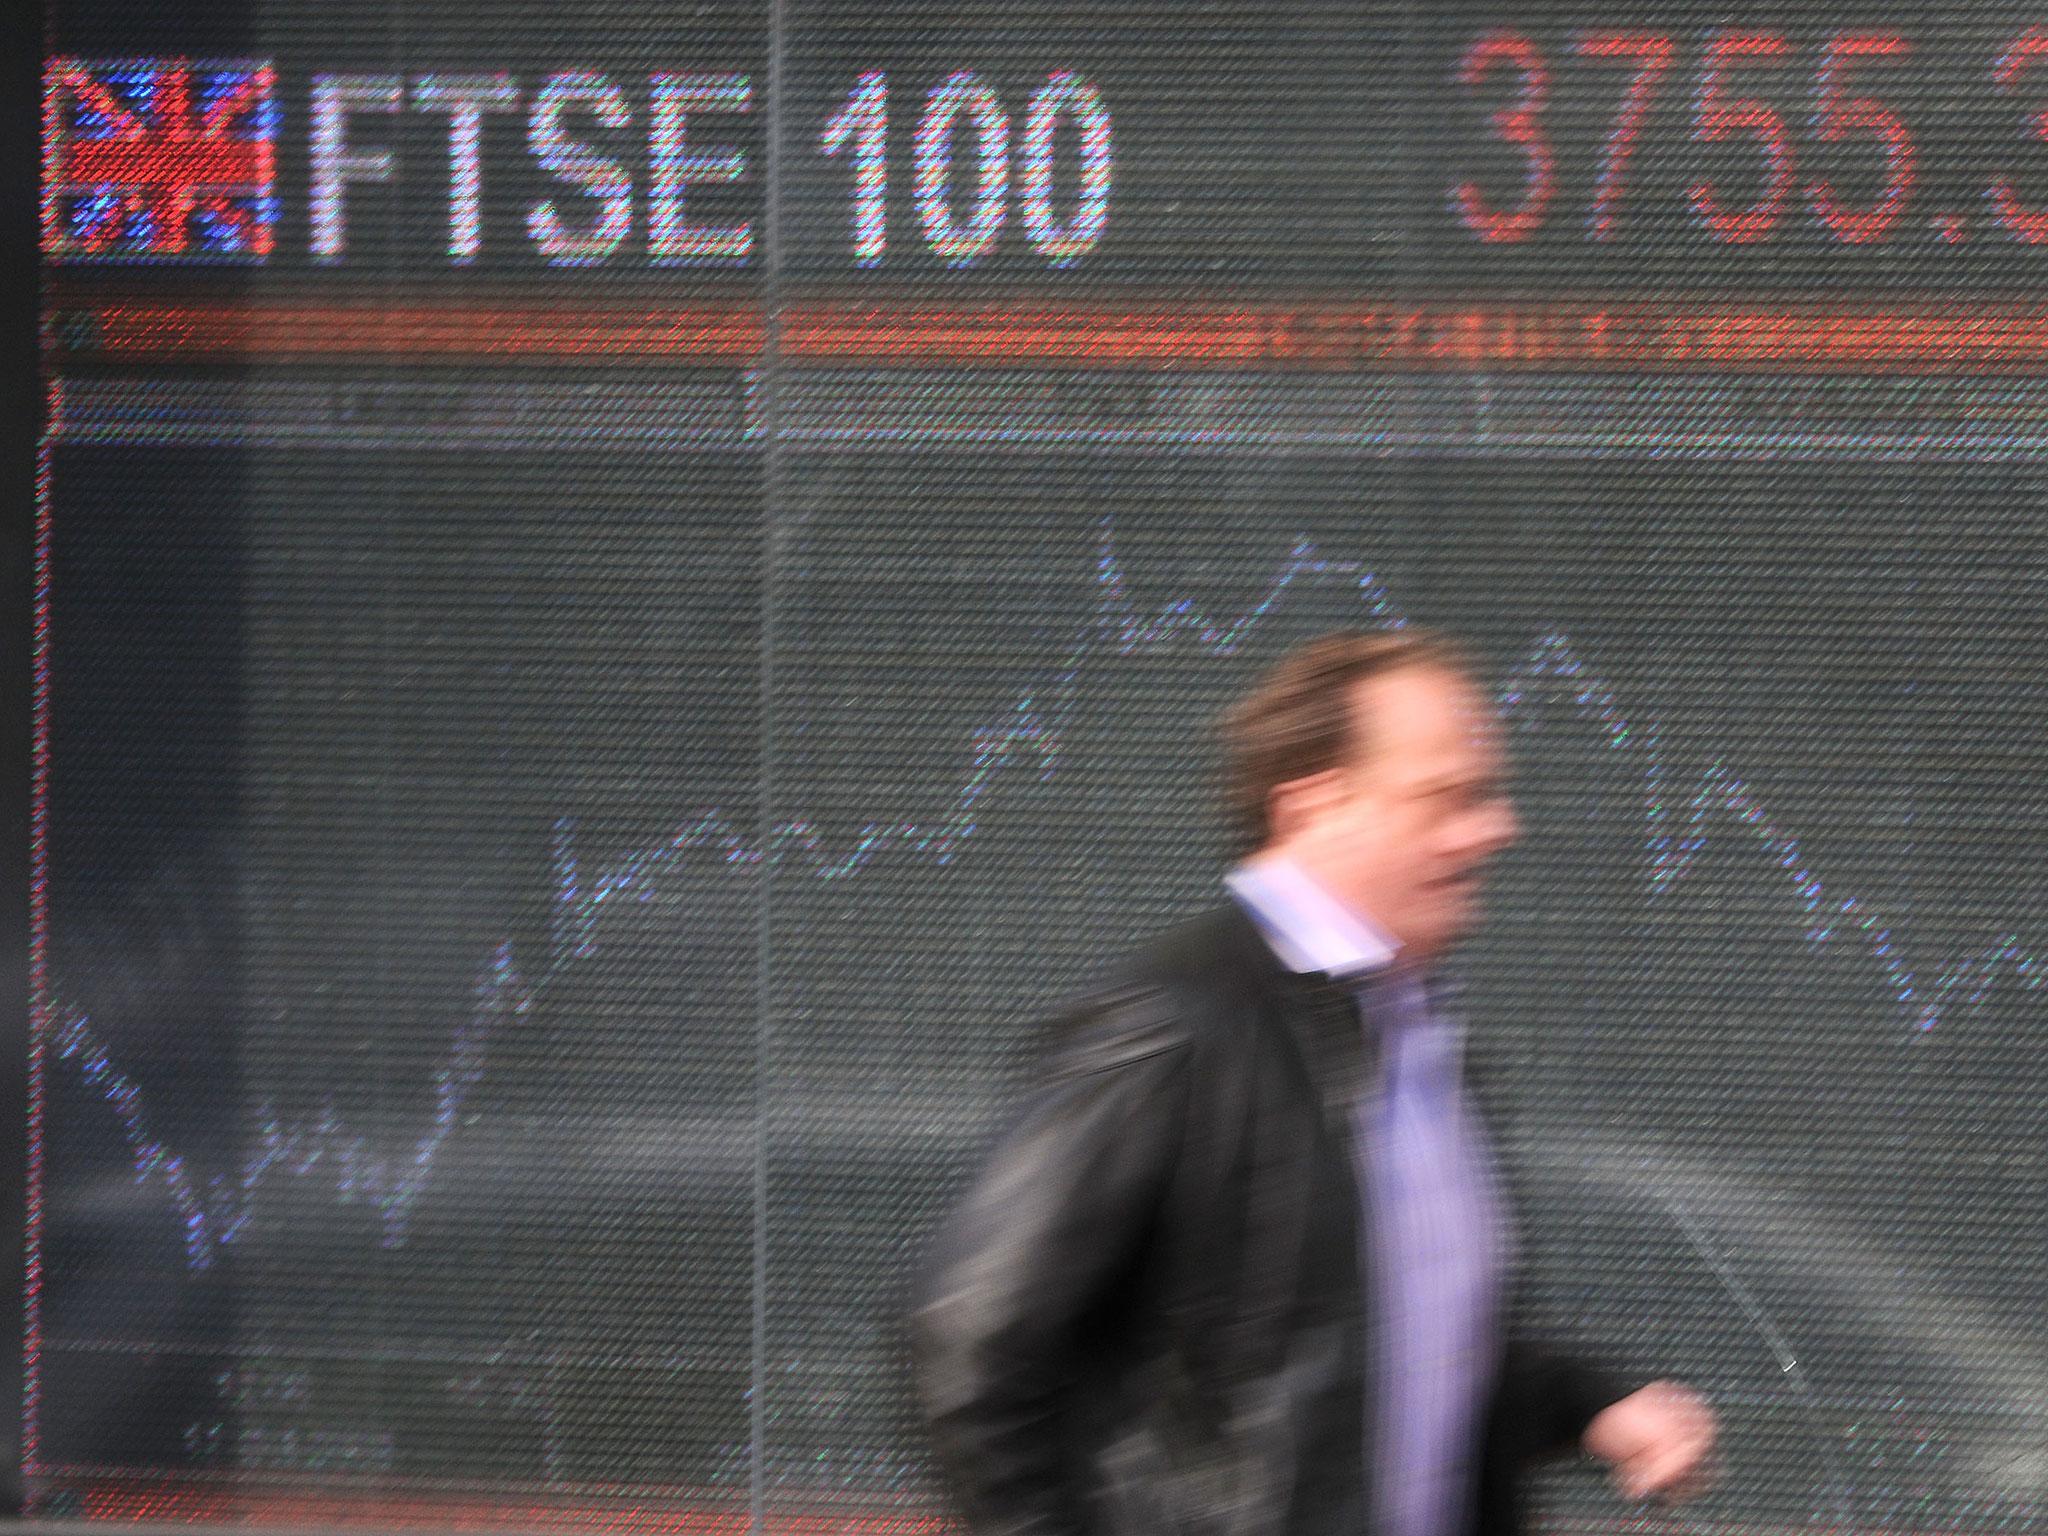 London shares edged higher but stay close to flatline as Covid fears linger on